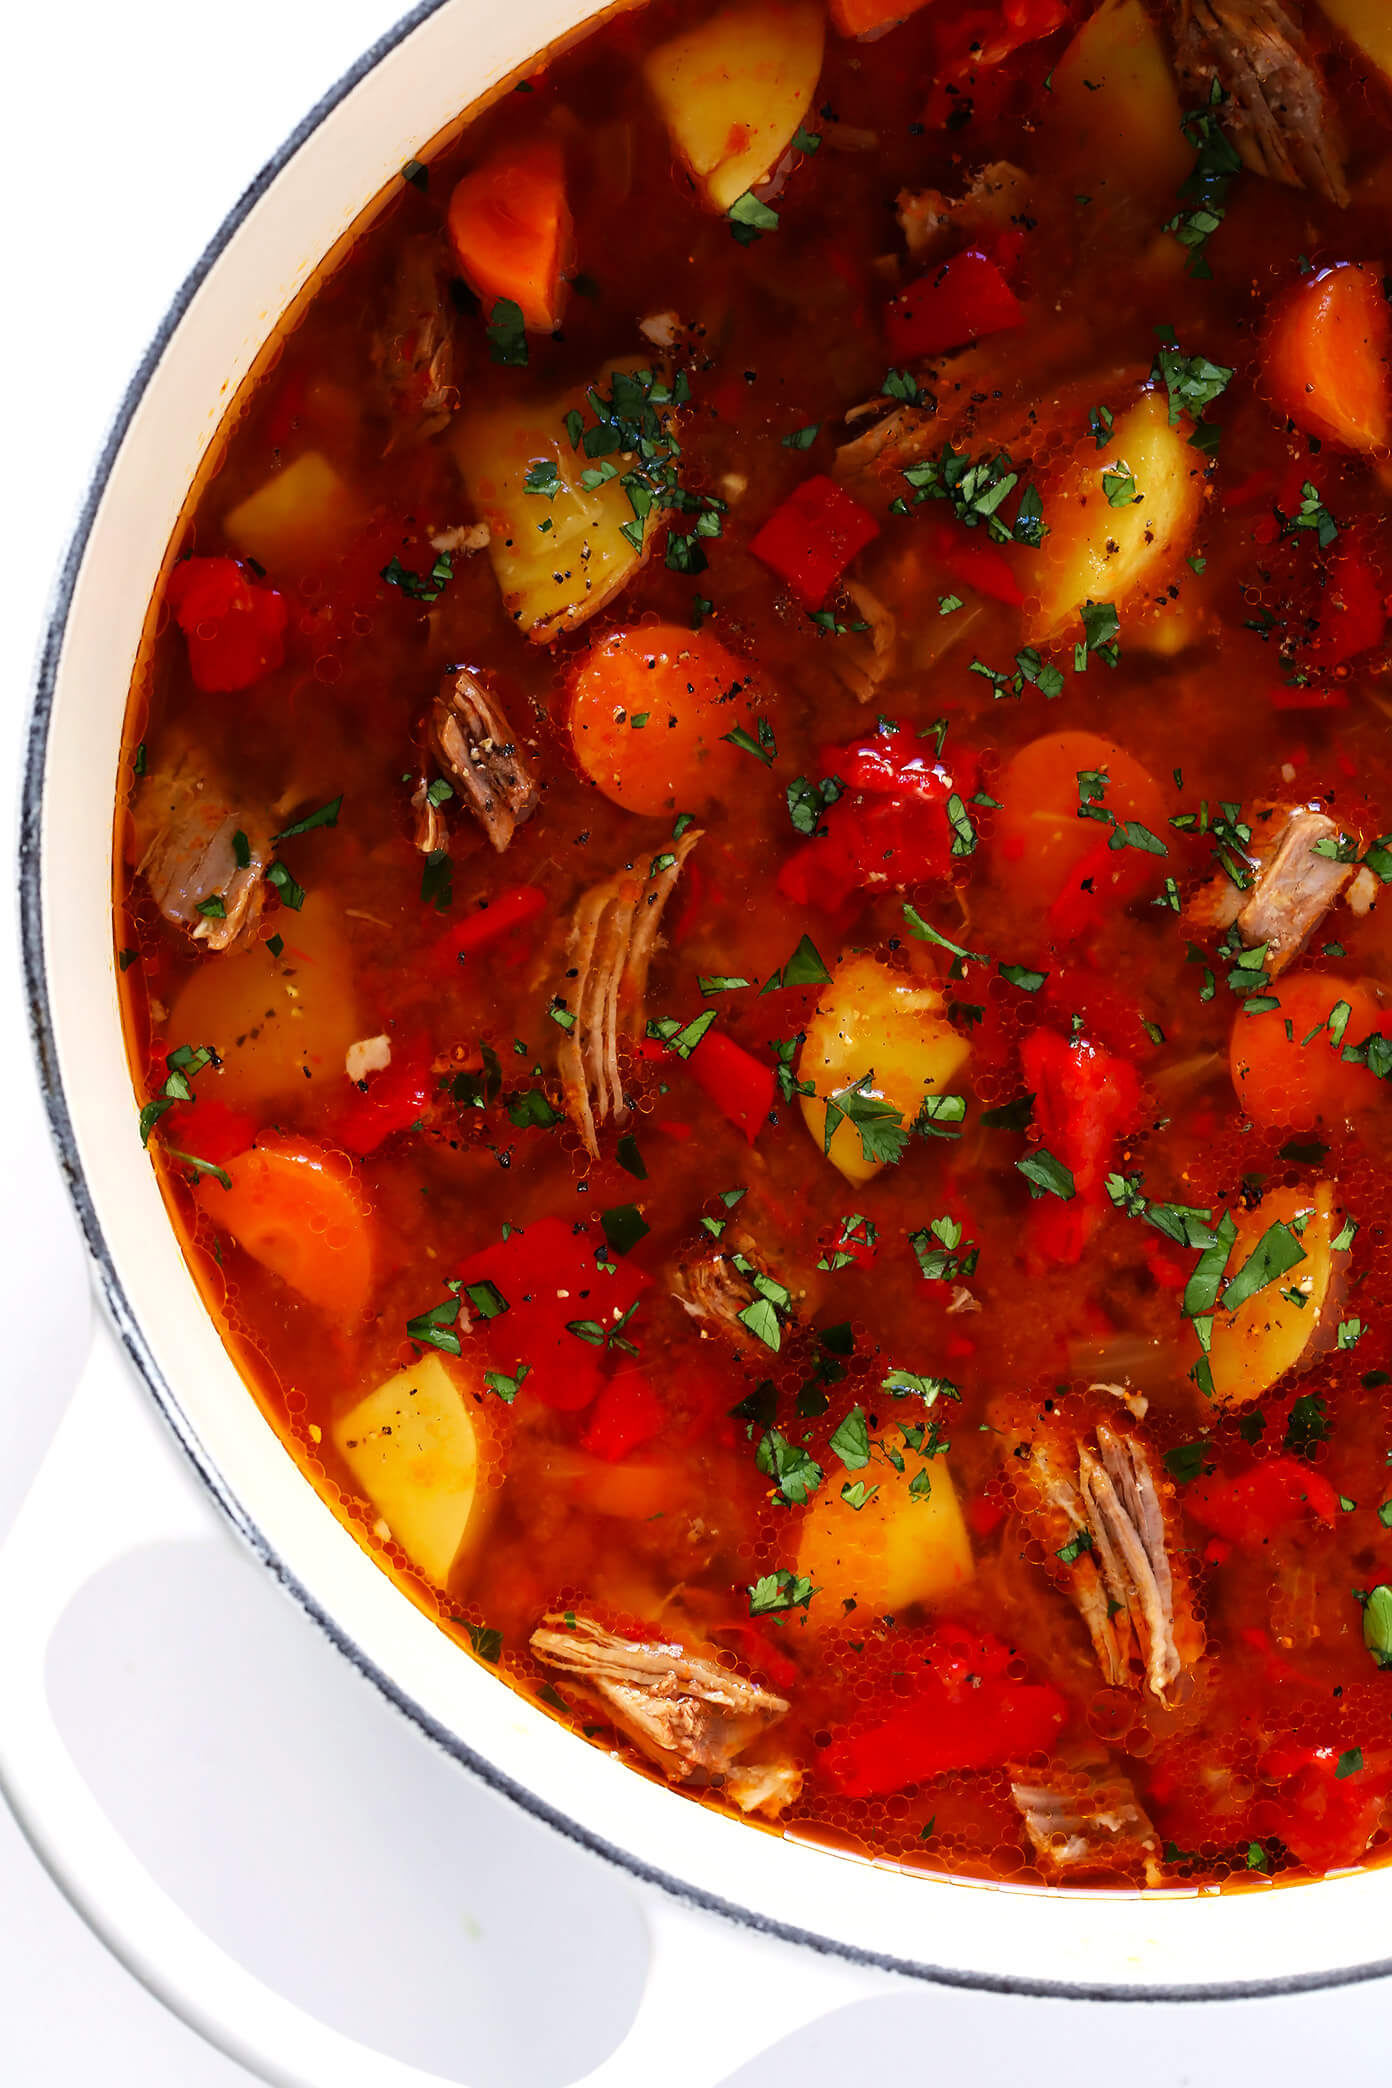 LOVE this Mexican Vegetable Beef Soup recipe! It's easy to make in the Instant Pot (pressure cooker), Crock-Pot (slow cooker), or on the stovetop. And it's full of tender steak, potatoes, carrots, roasted red peppers, tomatoes, and simmered in a delicious tomato chile broth. High recommend topping this stew with lots of fresh cilantro and avocado! #instantpot #soup #stew #pressurecooker #crockpot #slowcooker #comfortfood #beef #steak